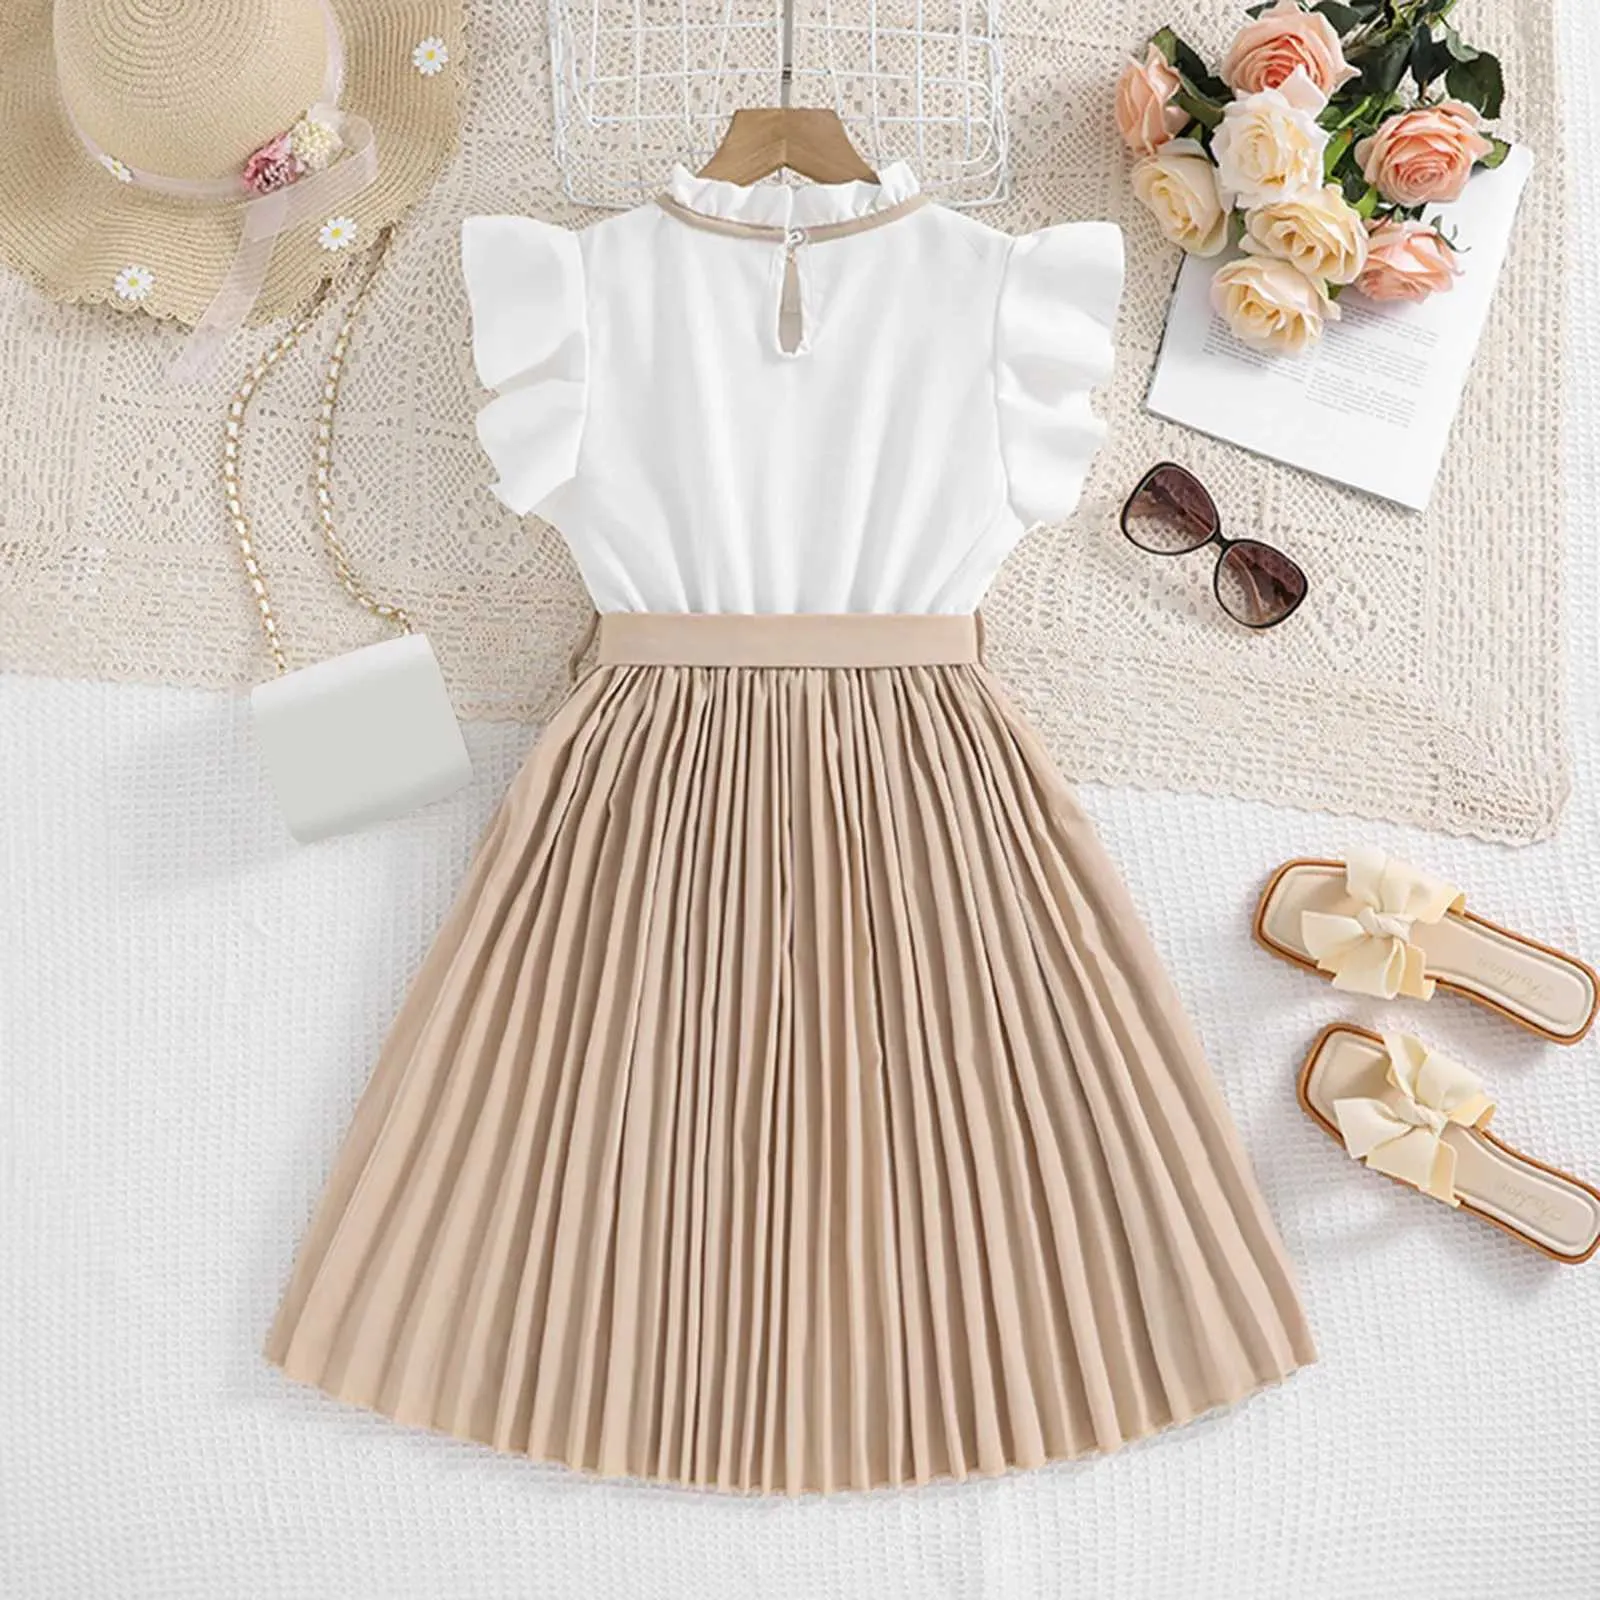 Girl's Dresses Summer casual childrens dress childrens clothing pleated dress for ages 7 to 12 sleeveless high waisted princess dress with belt d240515